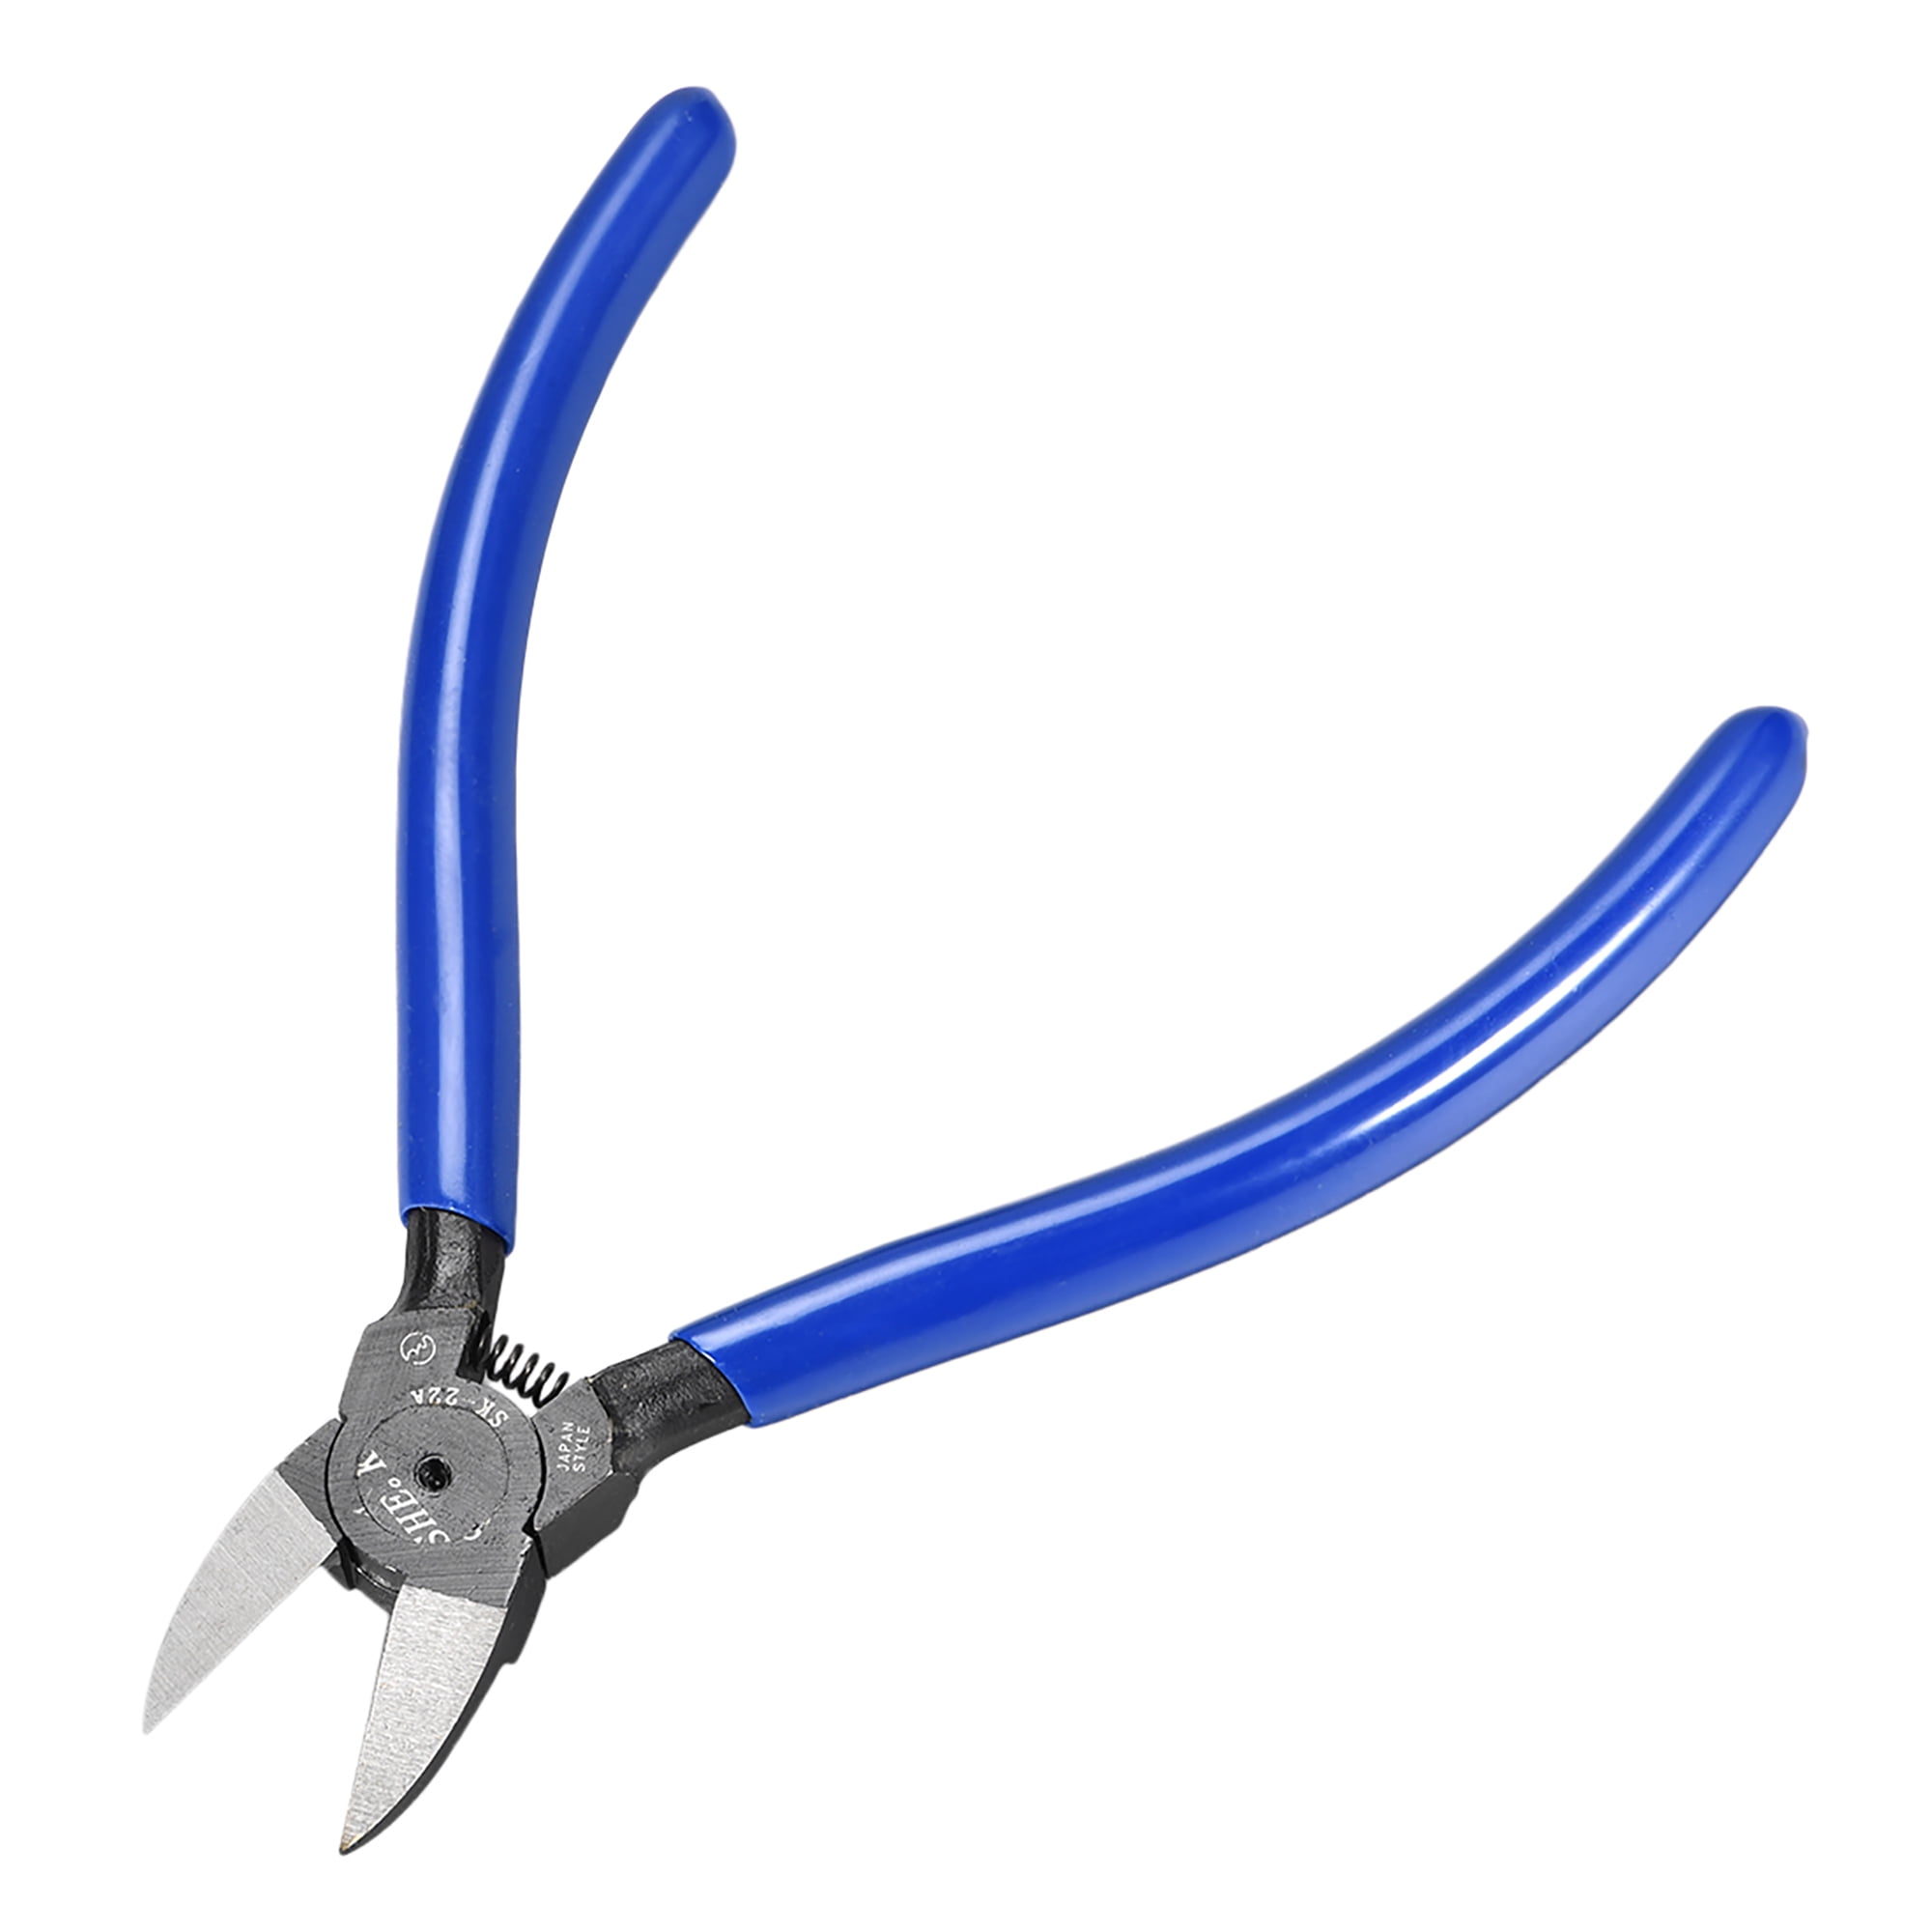 WORKPRO 6-in Home Repair Needle Nose Pliers with Wire Cutter in